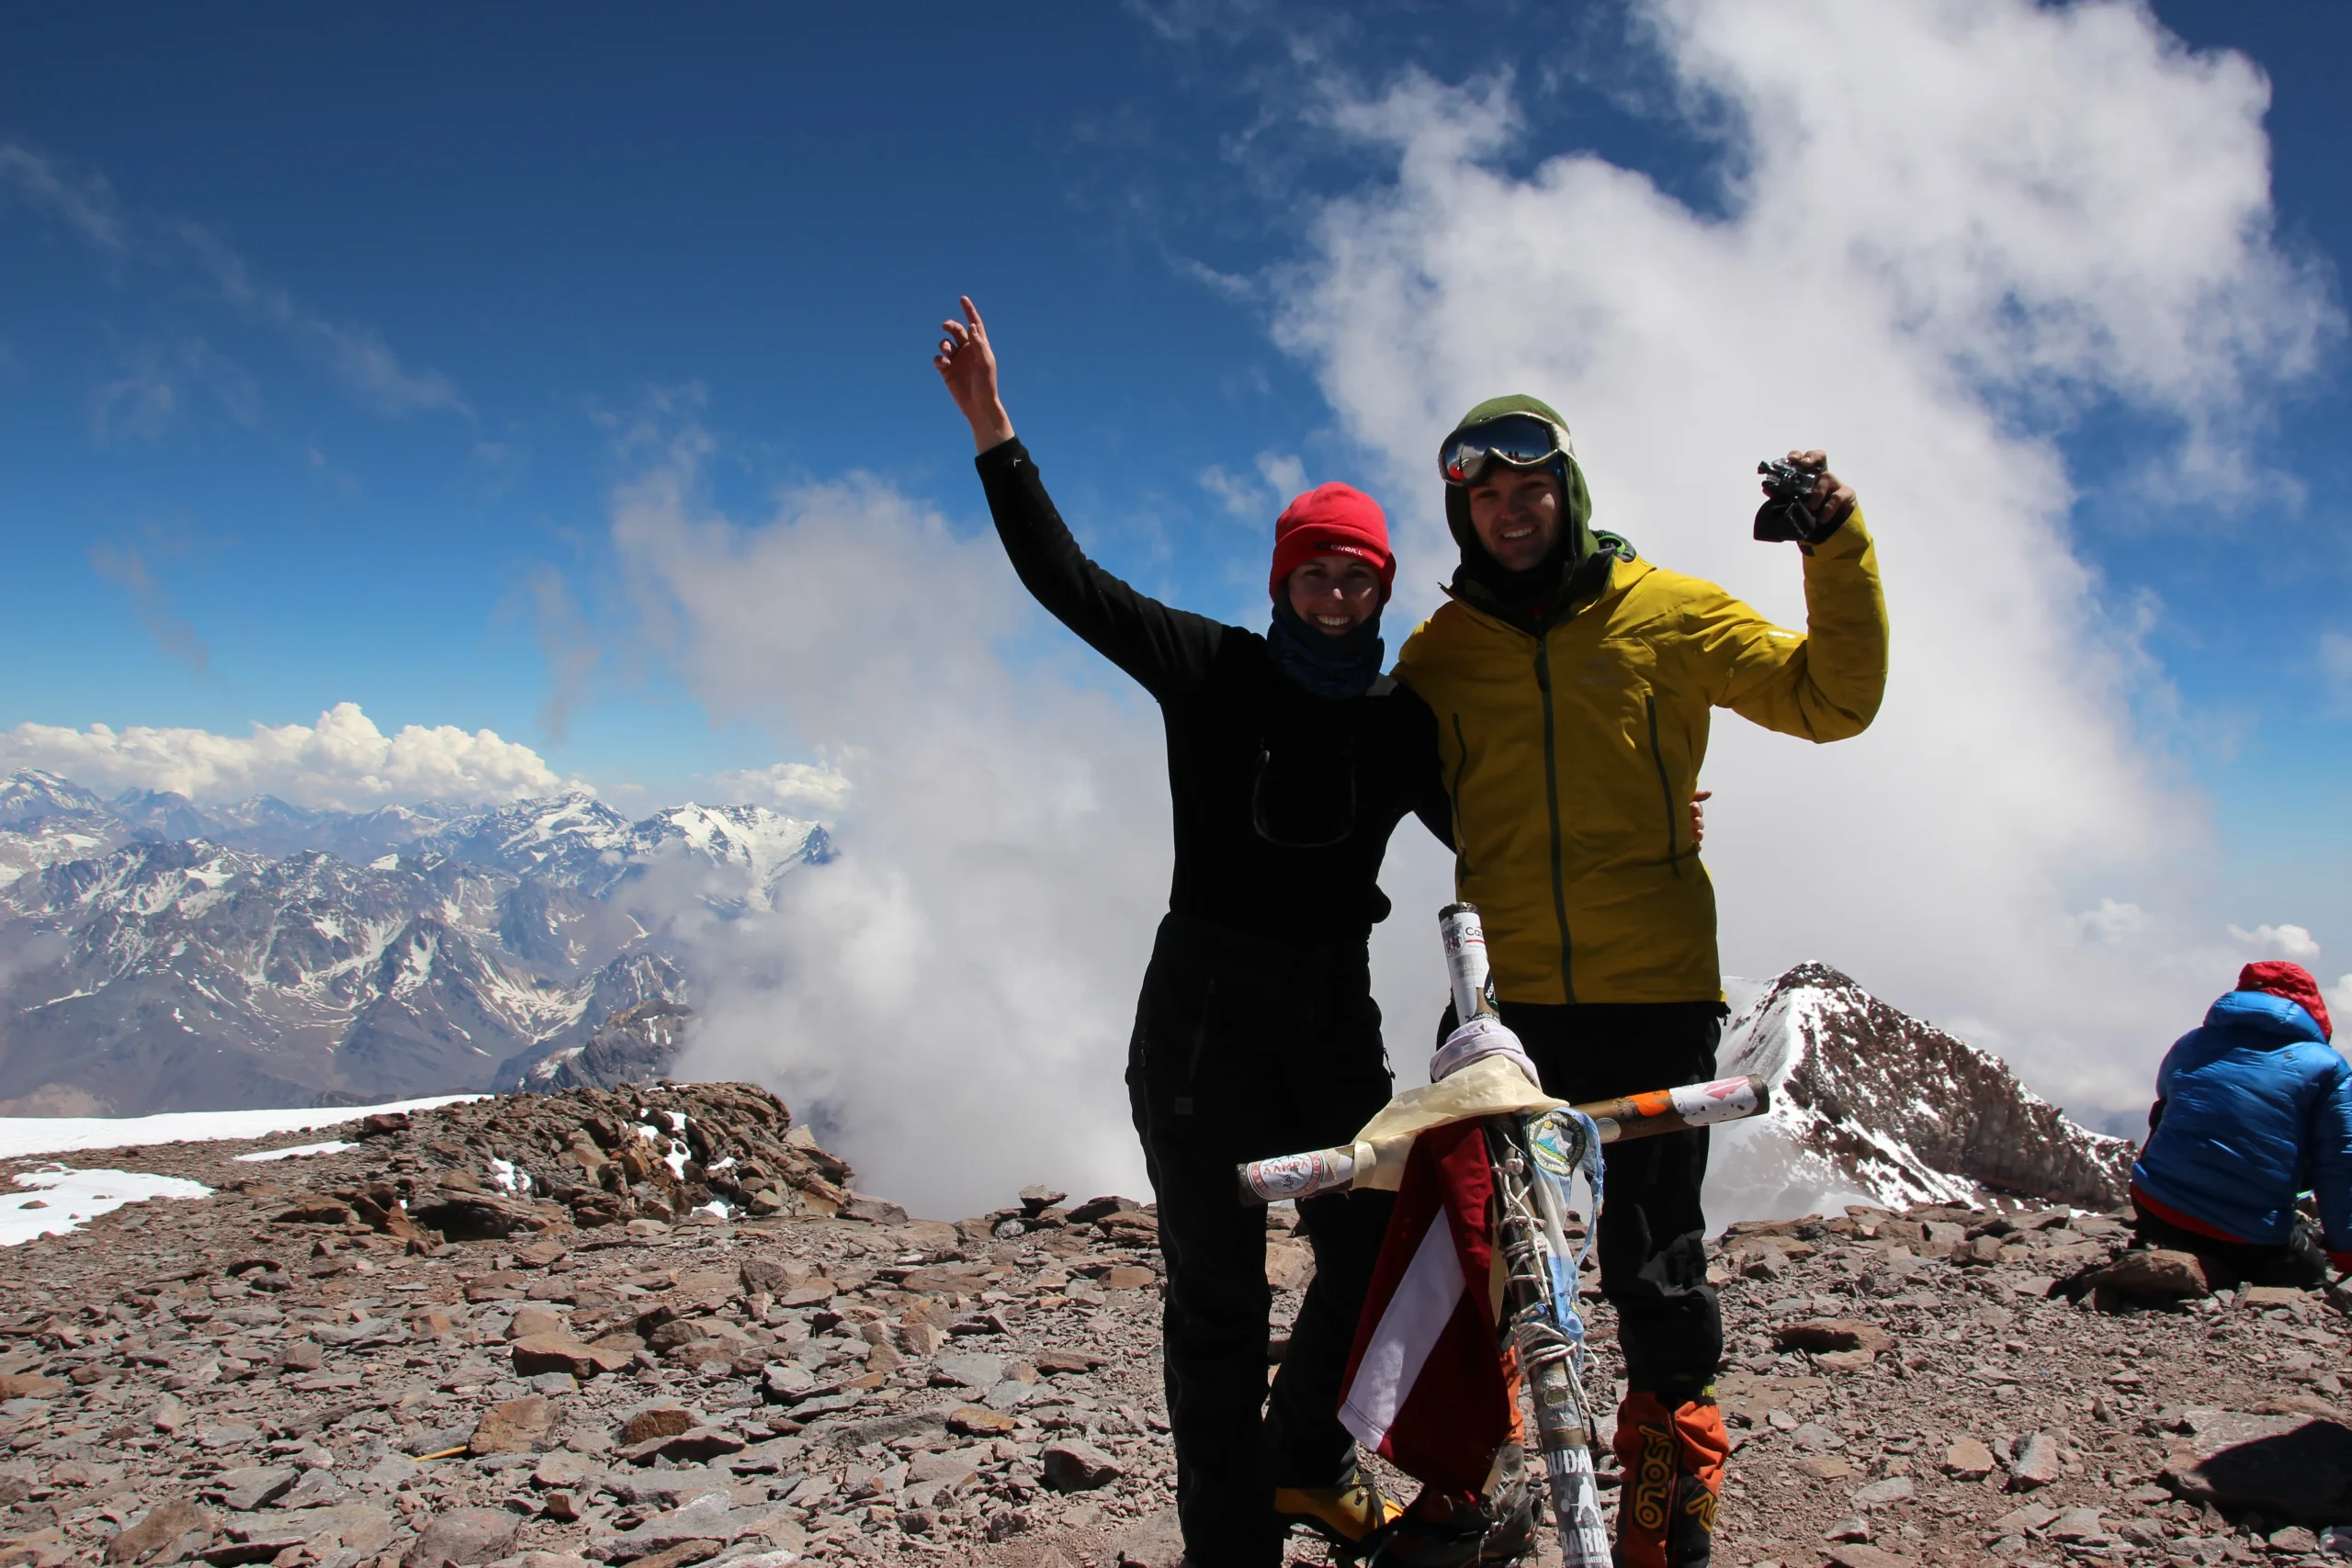 Laura and Logan at the summit of Aconcagua